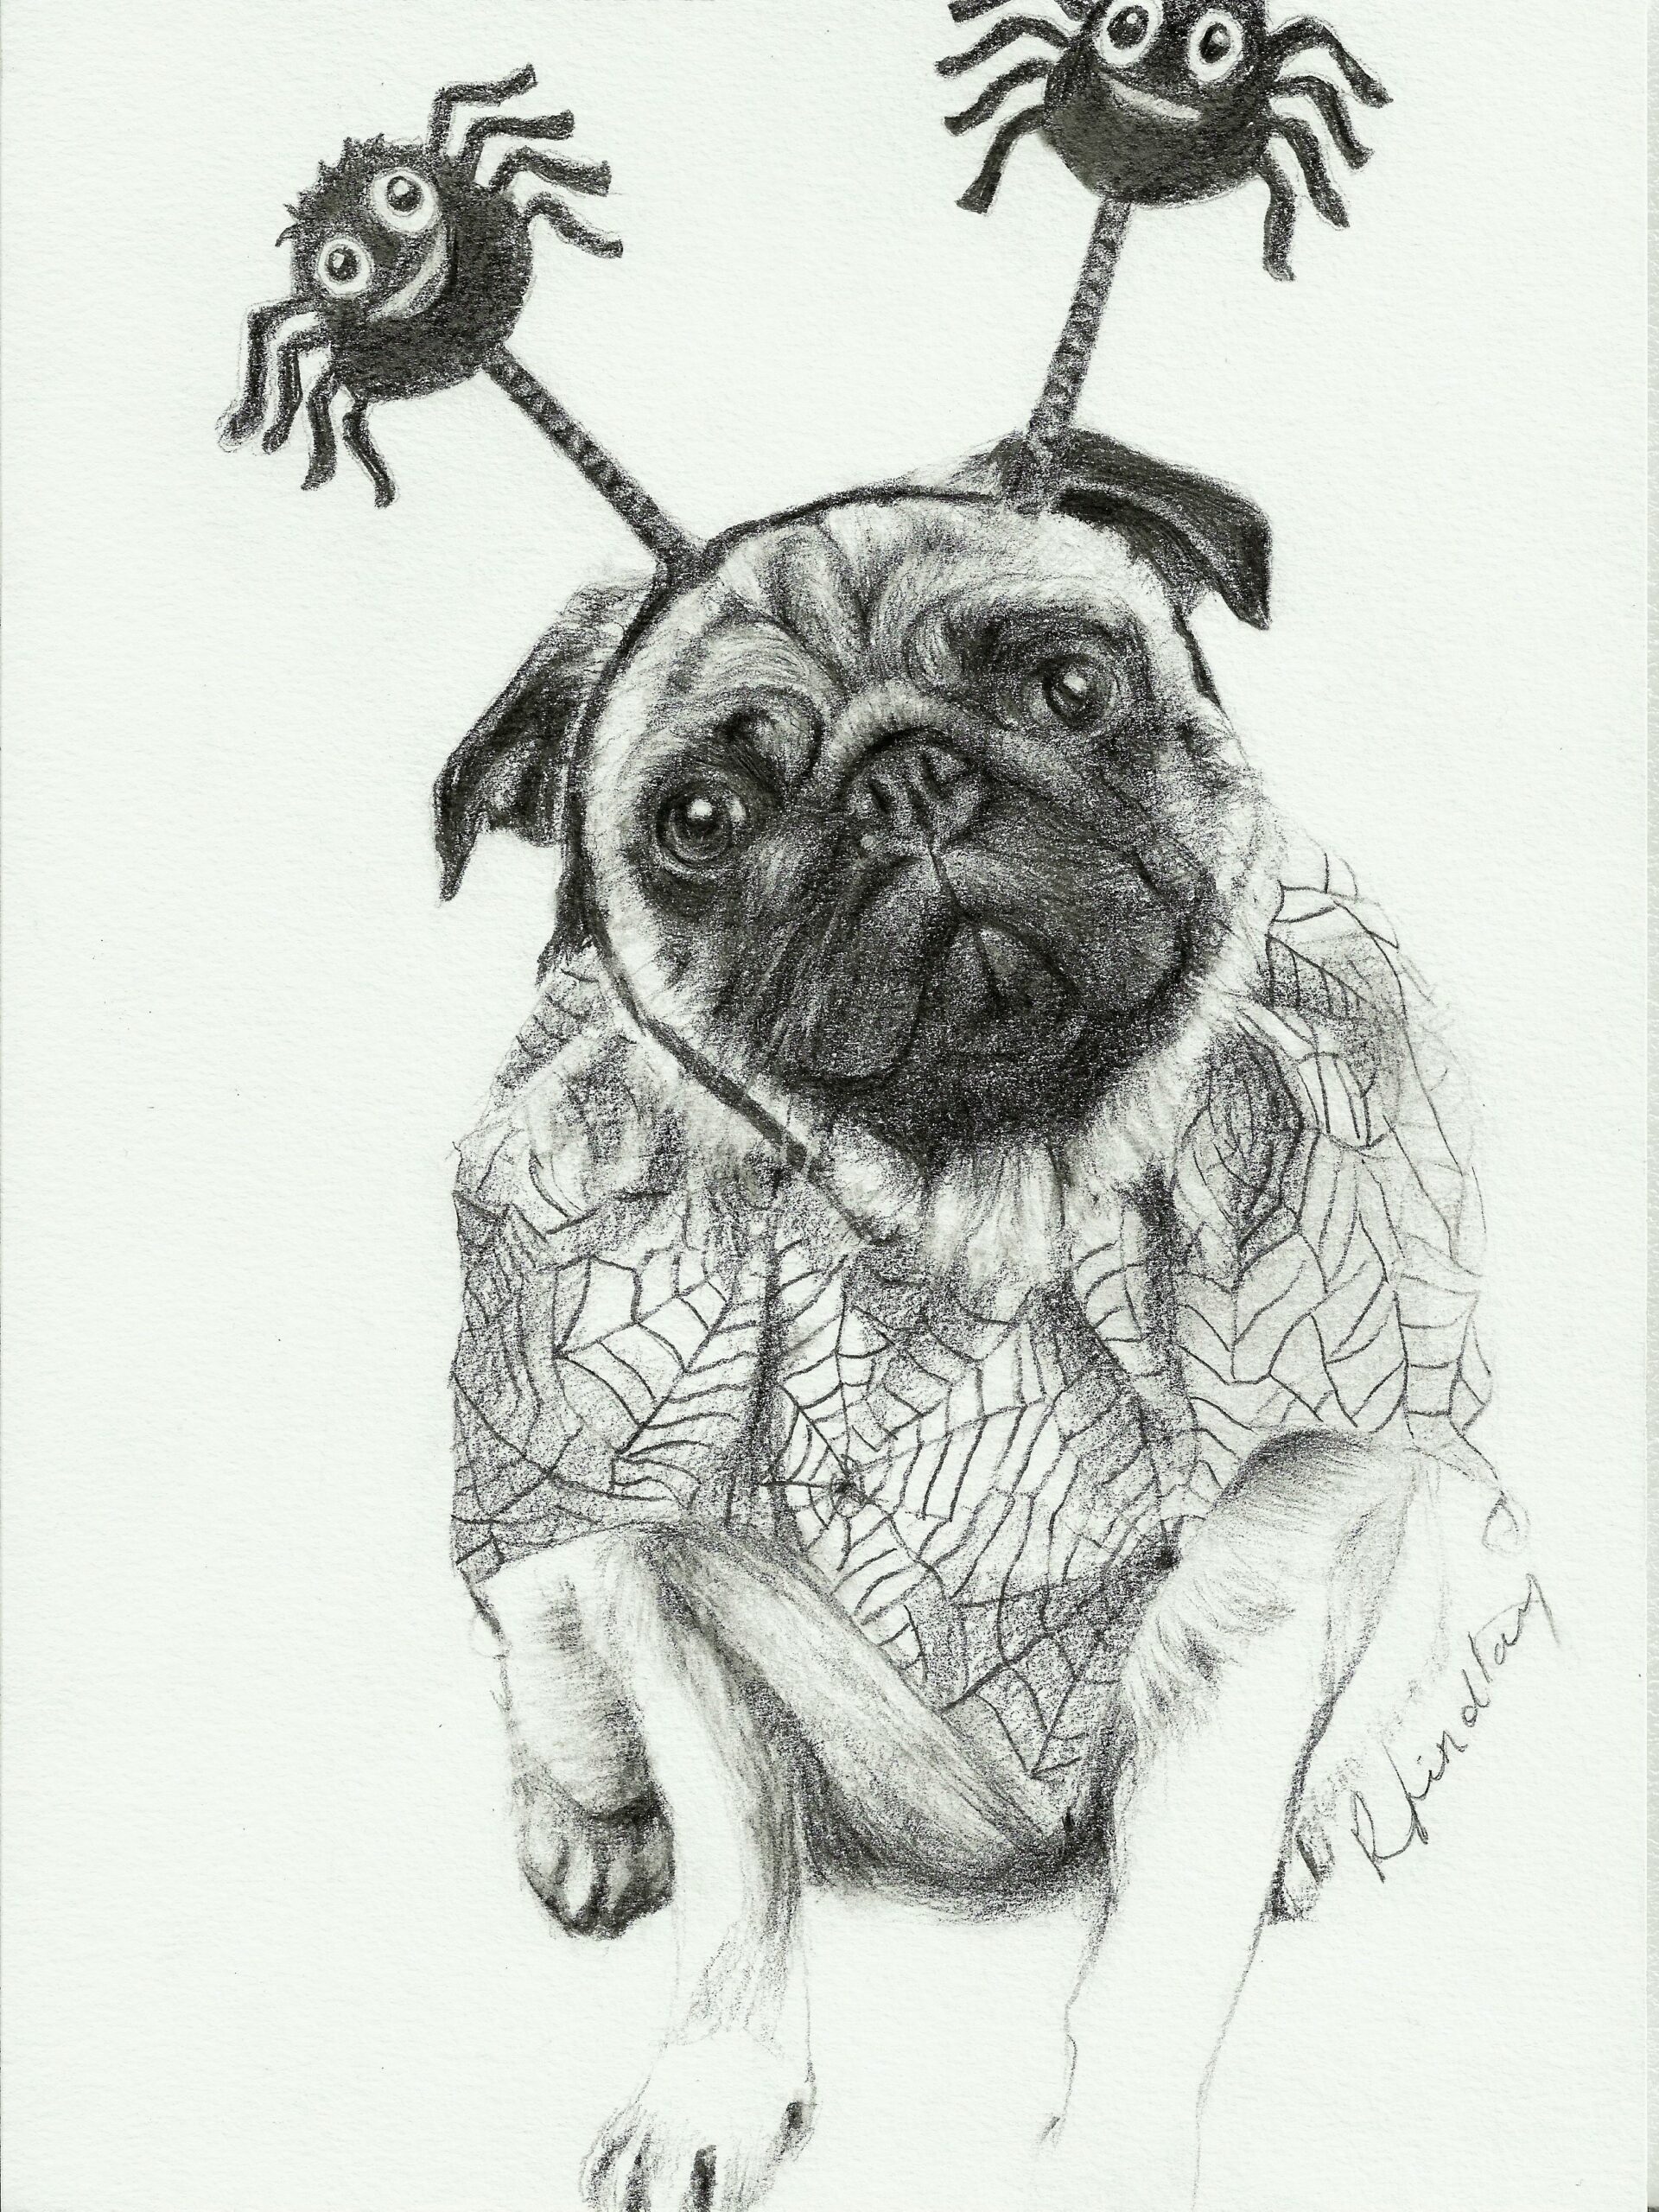 This is a pet portrait commis done in pencil on paper. It shows a pug dog wearing a Halloween outfit.